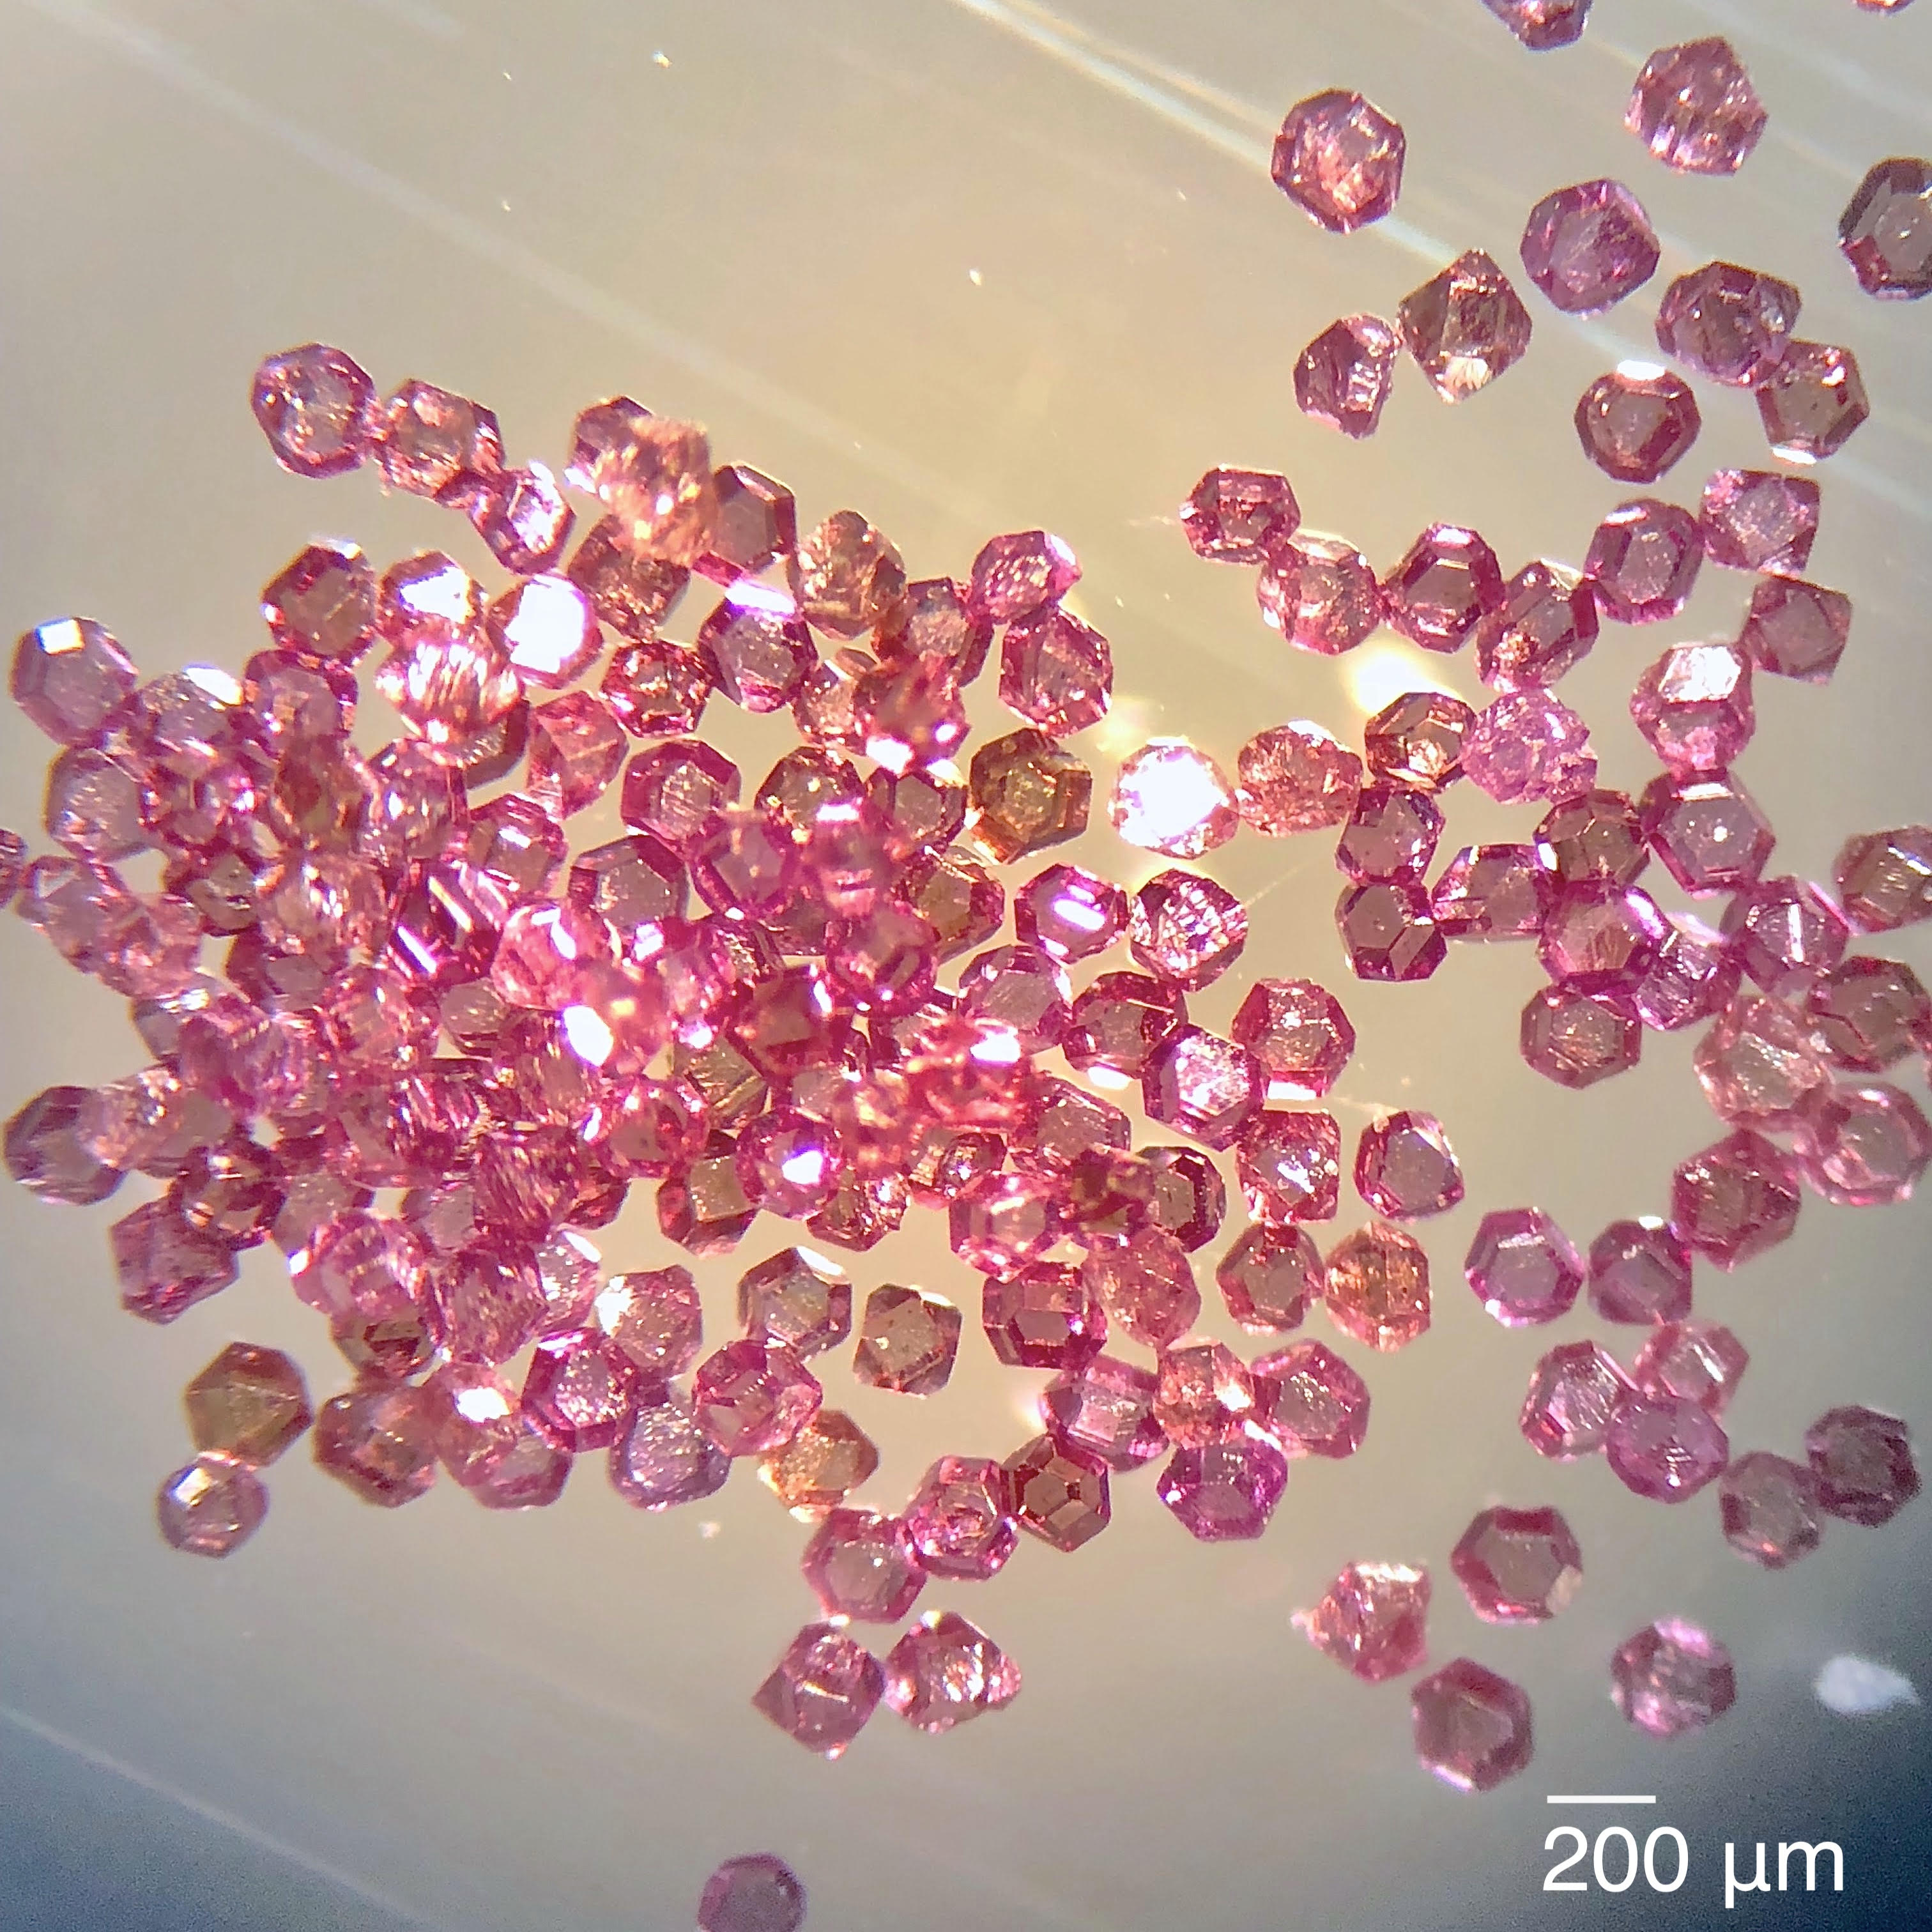 Photo - Microscopic images of diamond particles with nitrogen-vacancy defects. These samples, which exhibit a truncated octahedral shape, were used in experiments that sought new ways to tune and control an electronic property known as spin polarization. The scale bar at lower right is 200 microns (millionths of an inch). To the human eye, the pinkish diamonds resemble fine red sand. (Credit: Berkeley Lab, UC Berkeley)